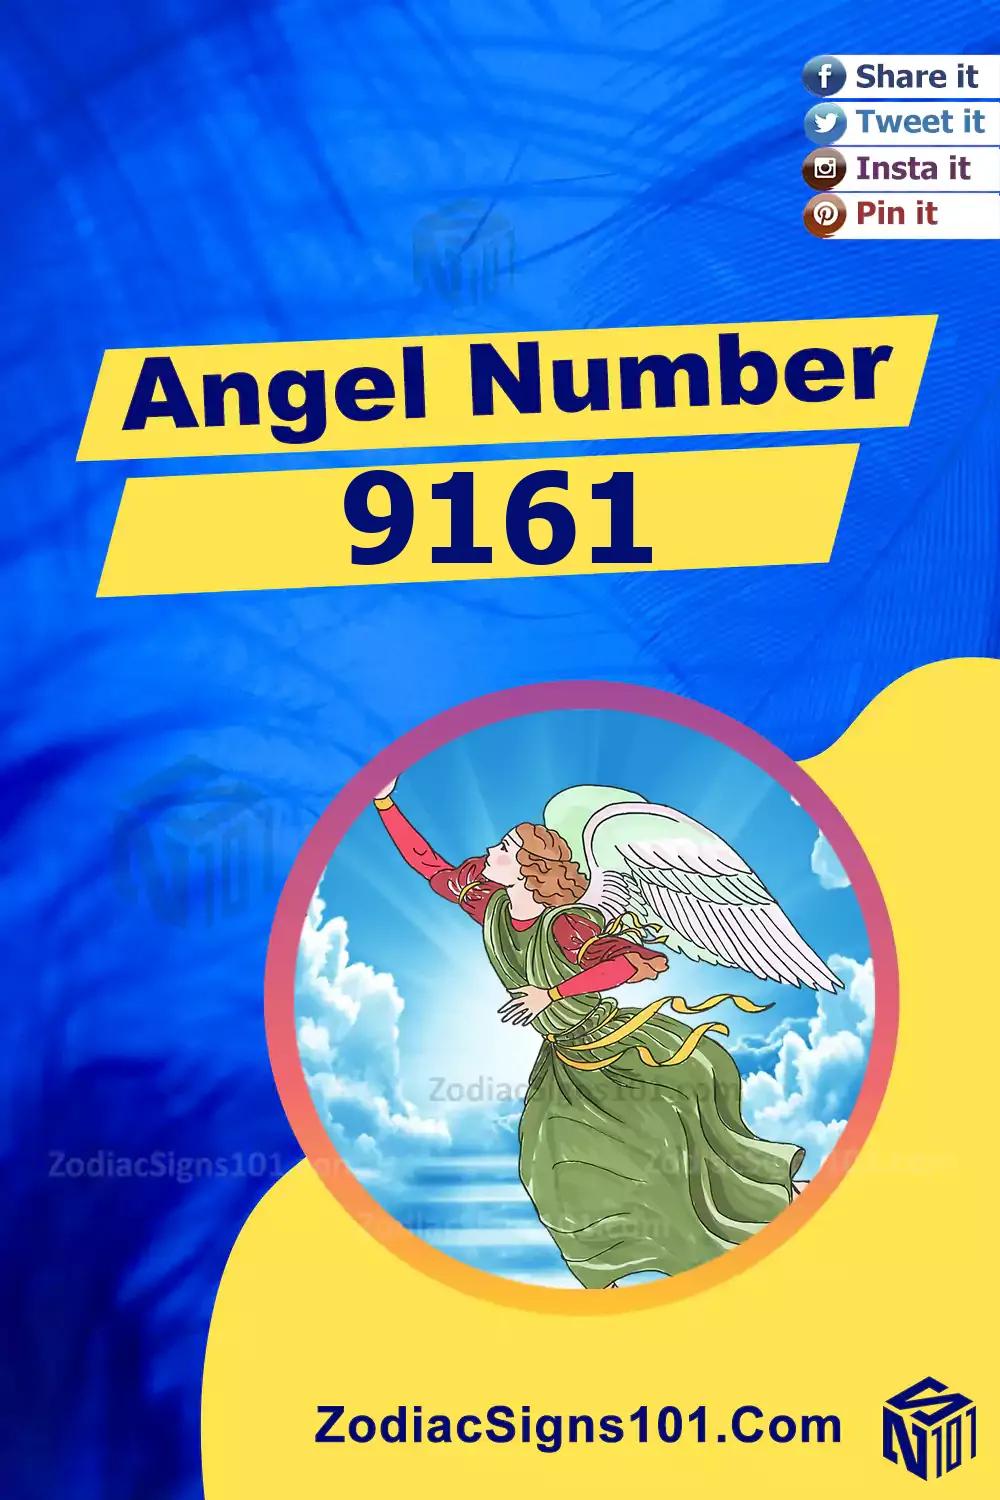 9161 Angel Number Meaning